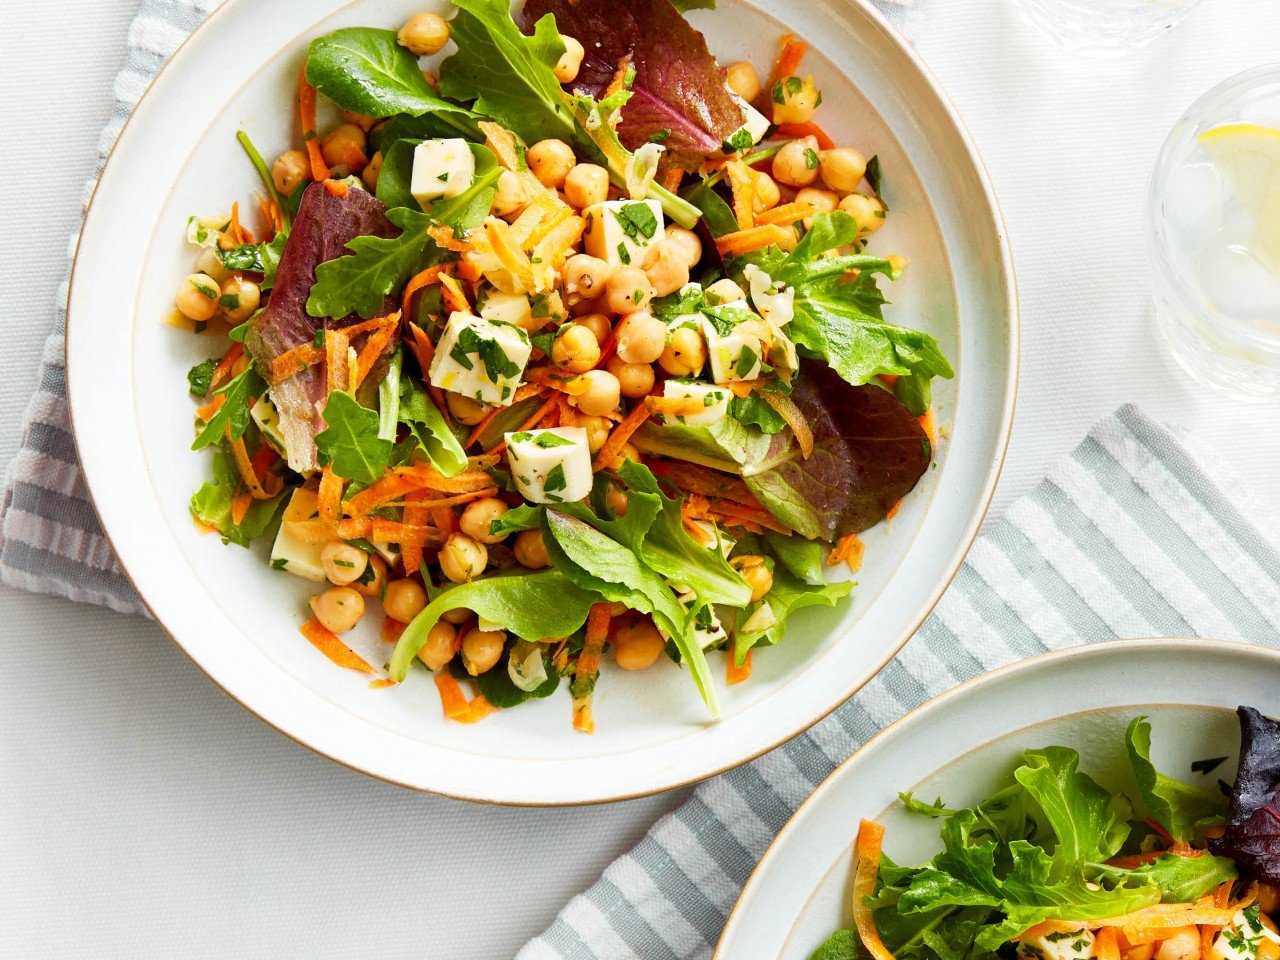 Carrot, halloumi and chickpea salad on a plate with striped grey and white napkins